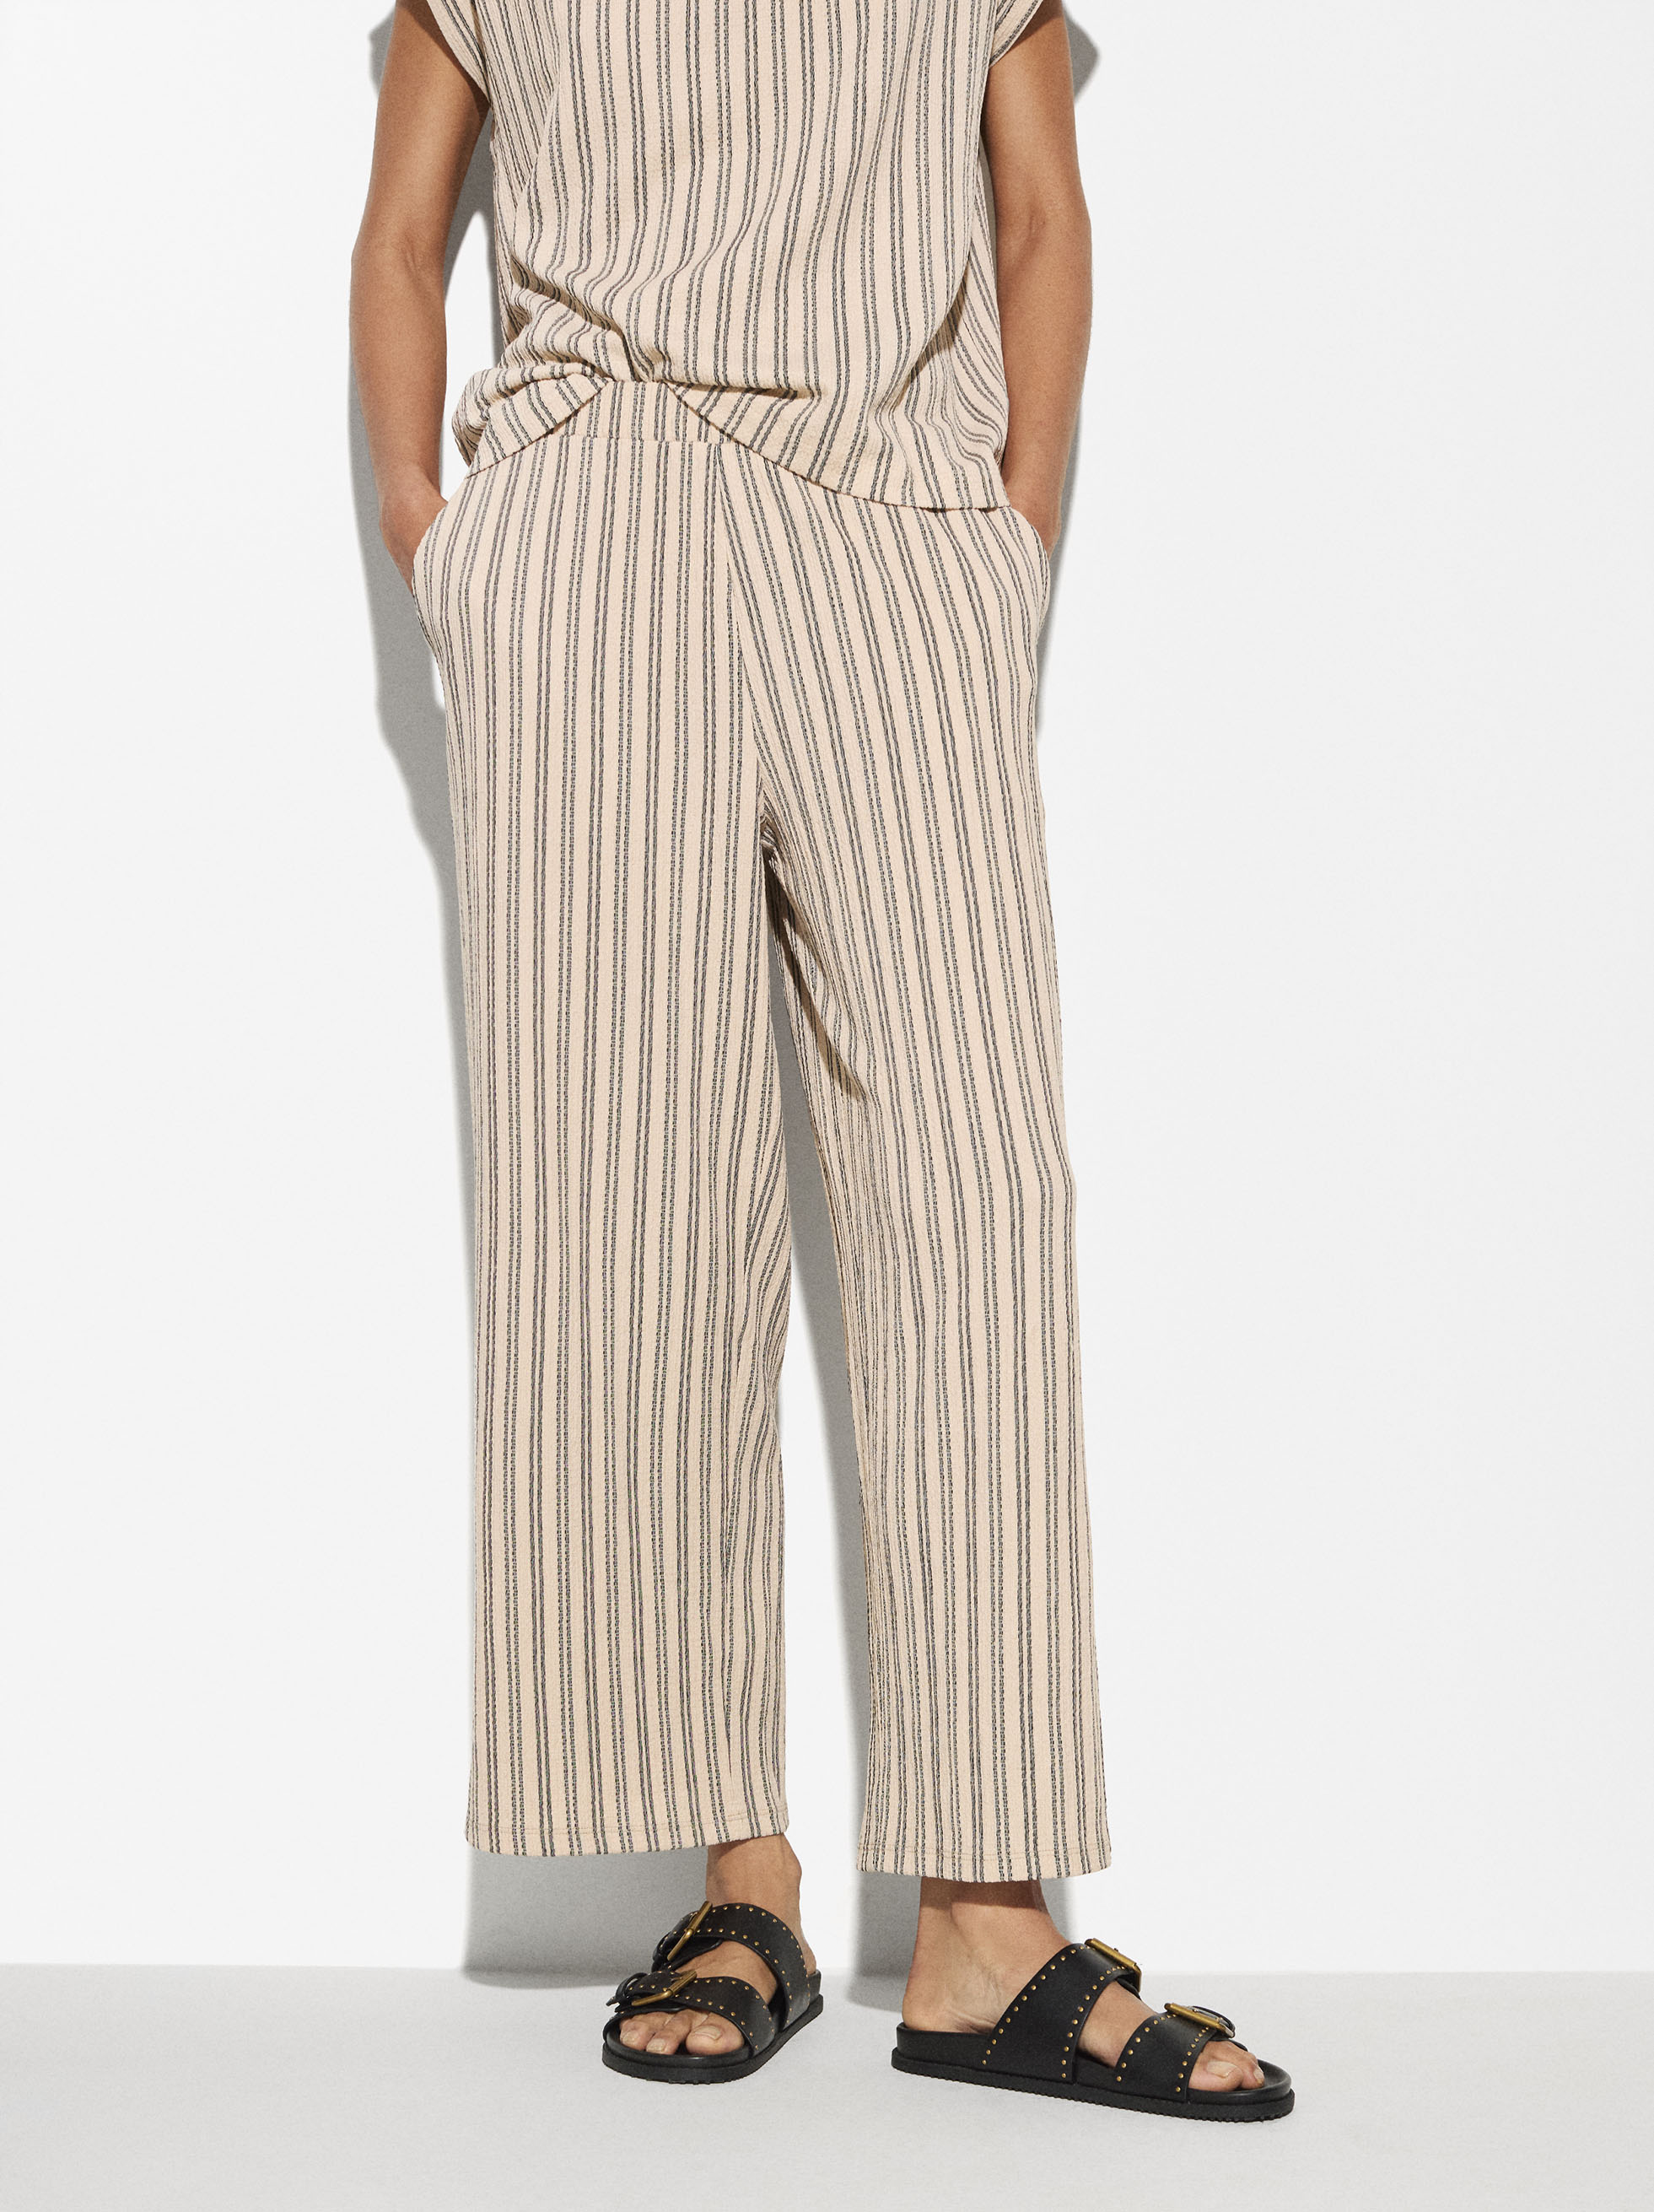 Textured Pants With Elastic Waistband image number 2.0